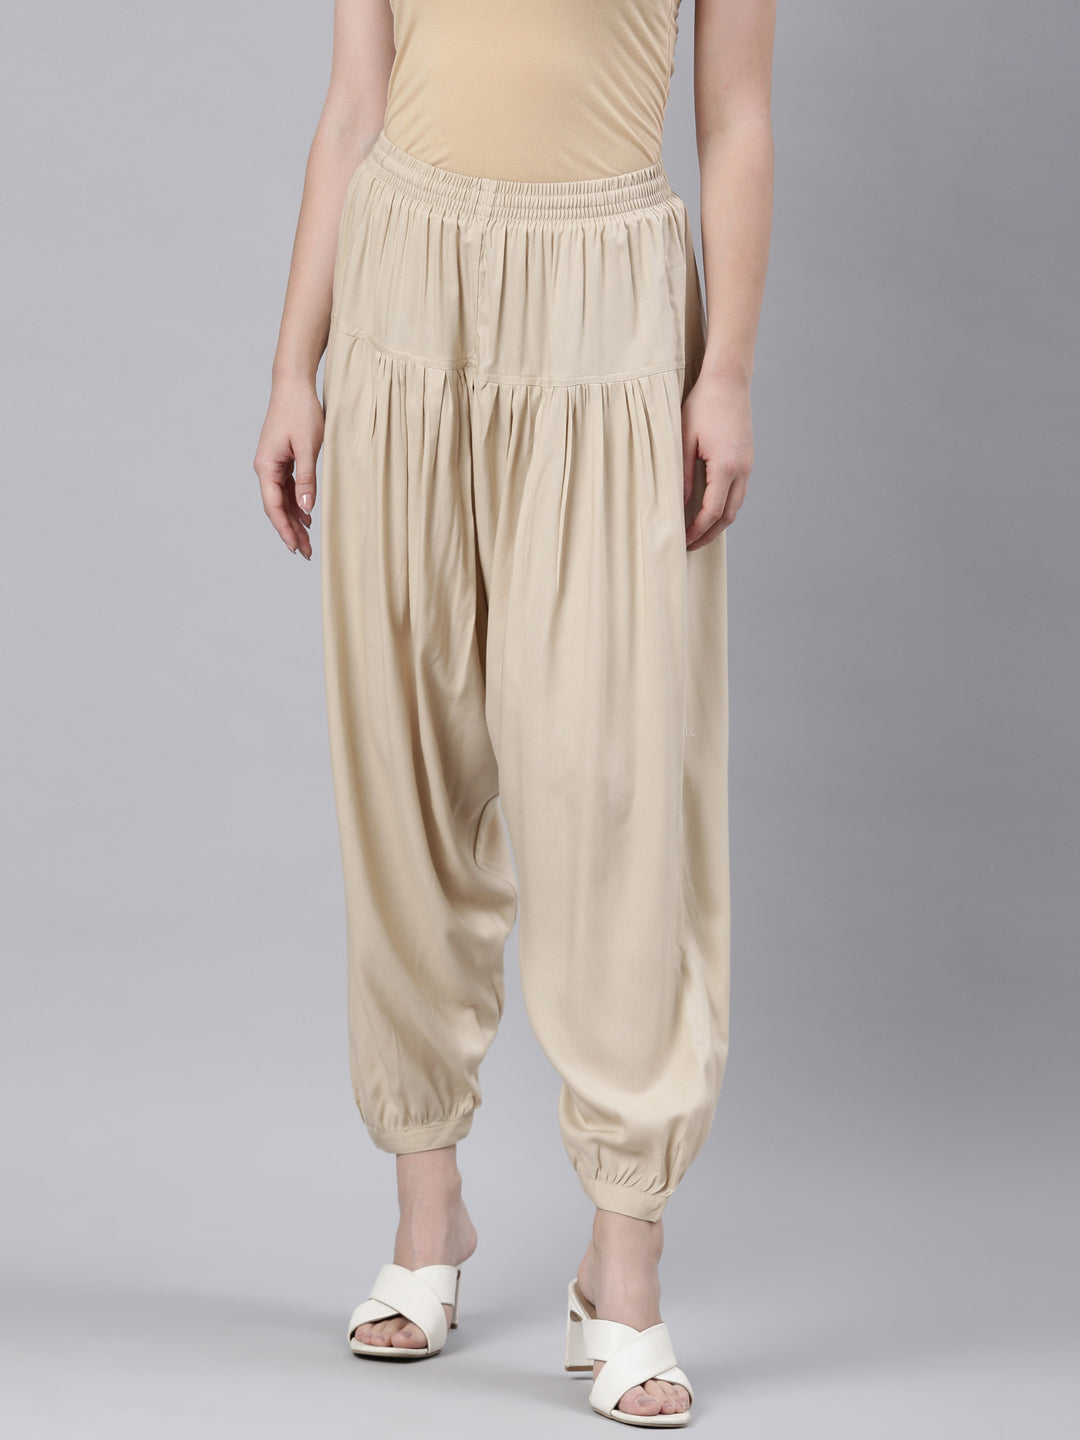 Buy GO COLORS Cream Womens Solid Harem Pants | Shoppers Stop